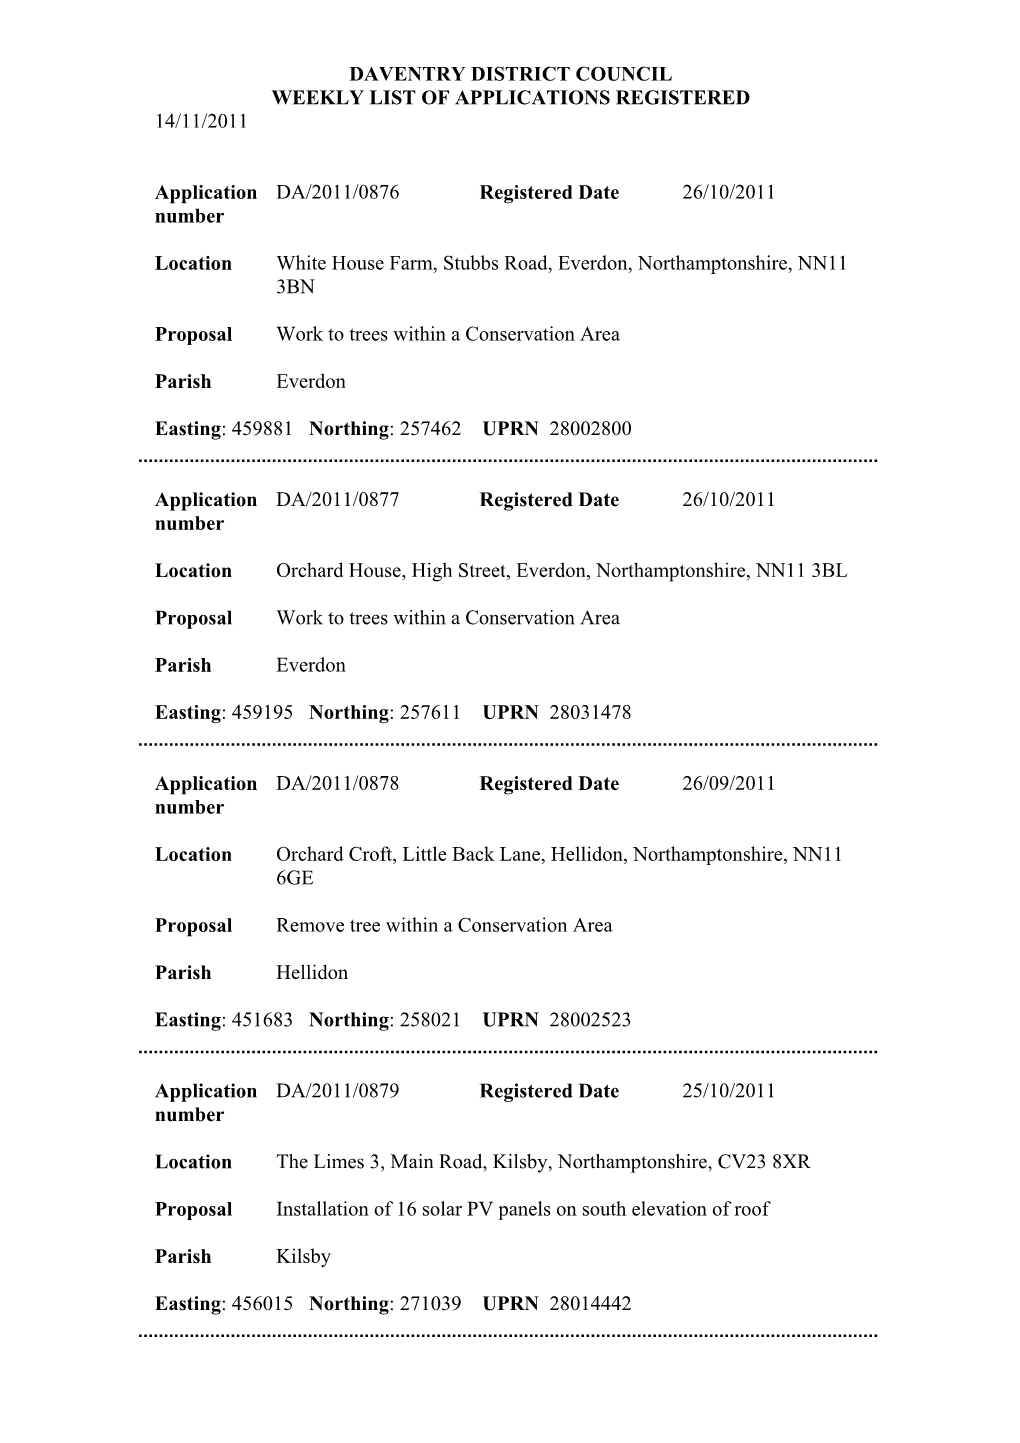 Daventry District Council Weekly List of Applications Registered 14/11/2011